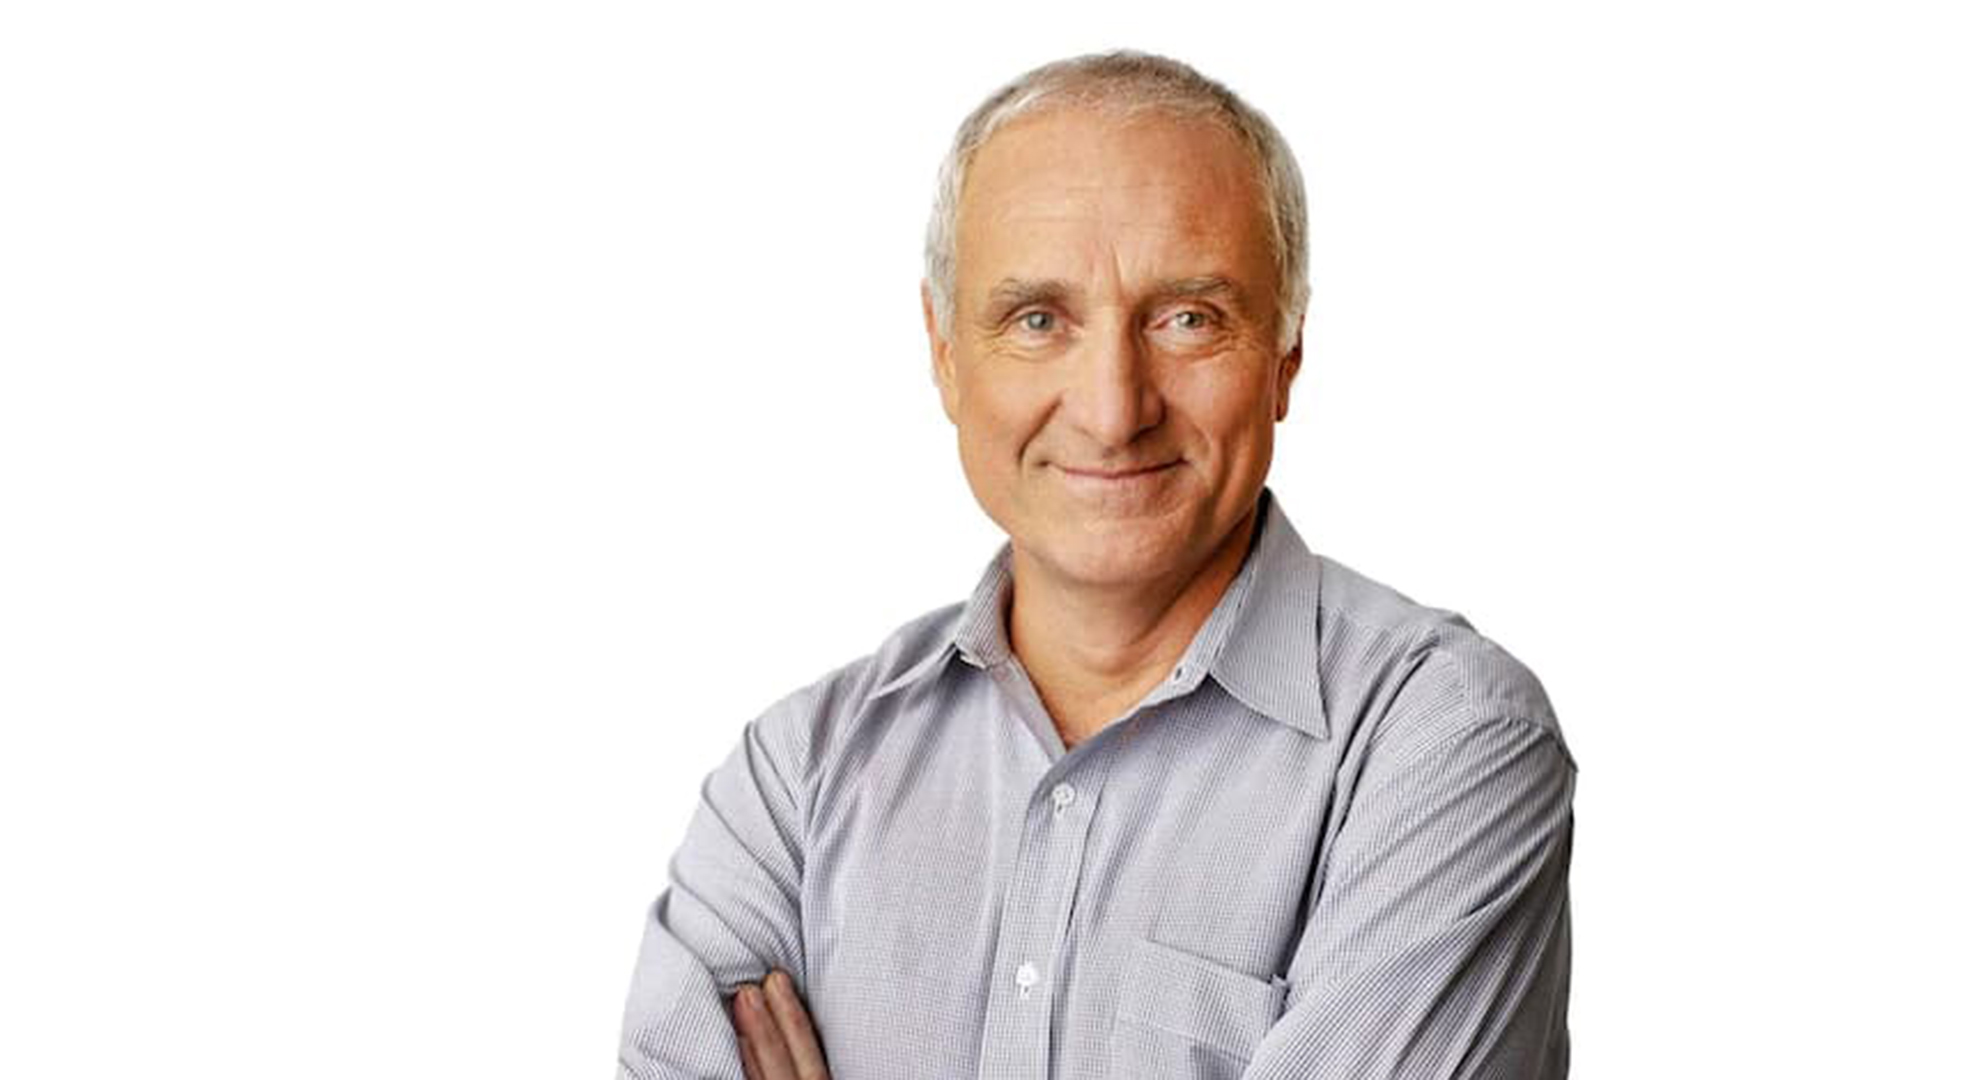 Image of Robyn Williams smiling with arms crossed